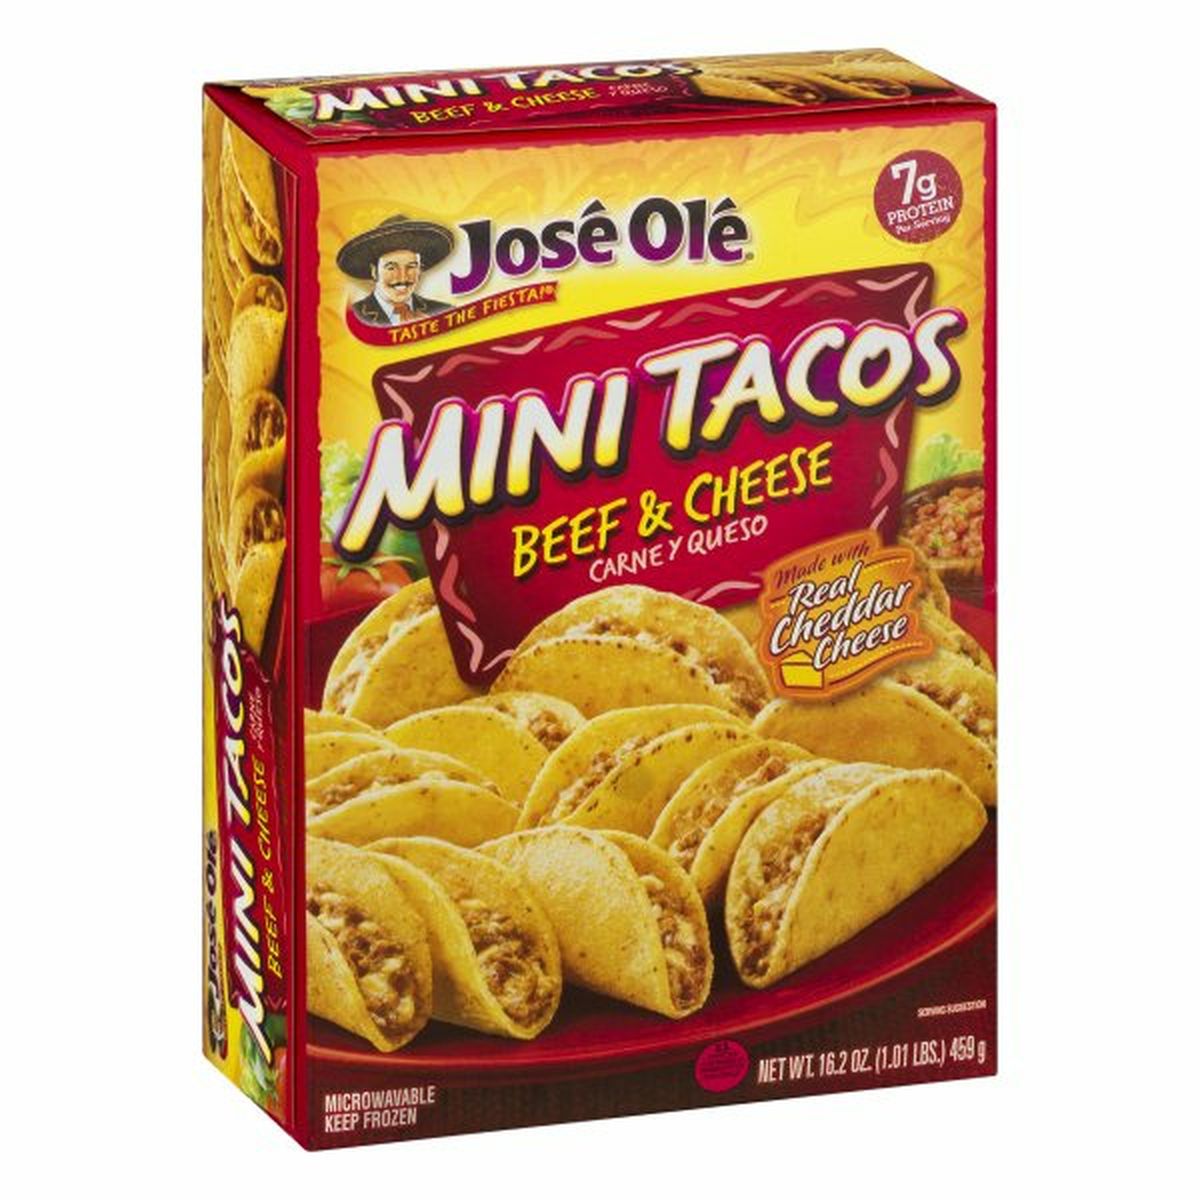 Calories in JosÃ© OlÃ© Mini Tacos, Beef & Cheese